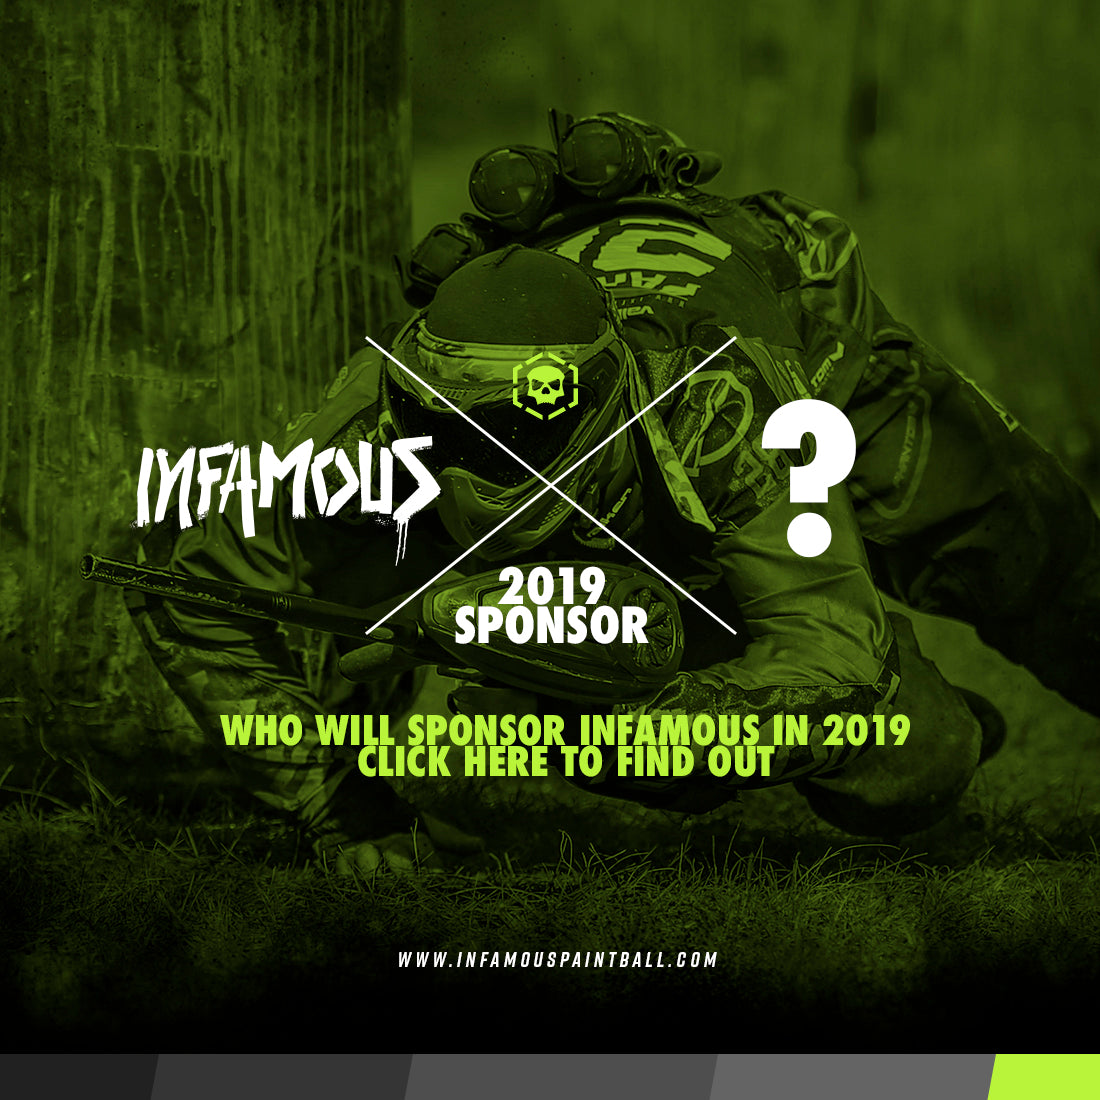 WHO WILL SPONSOR INFAMOUS IN 2019?